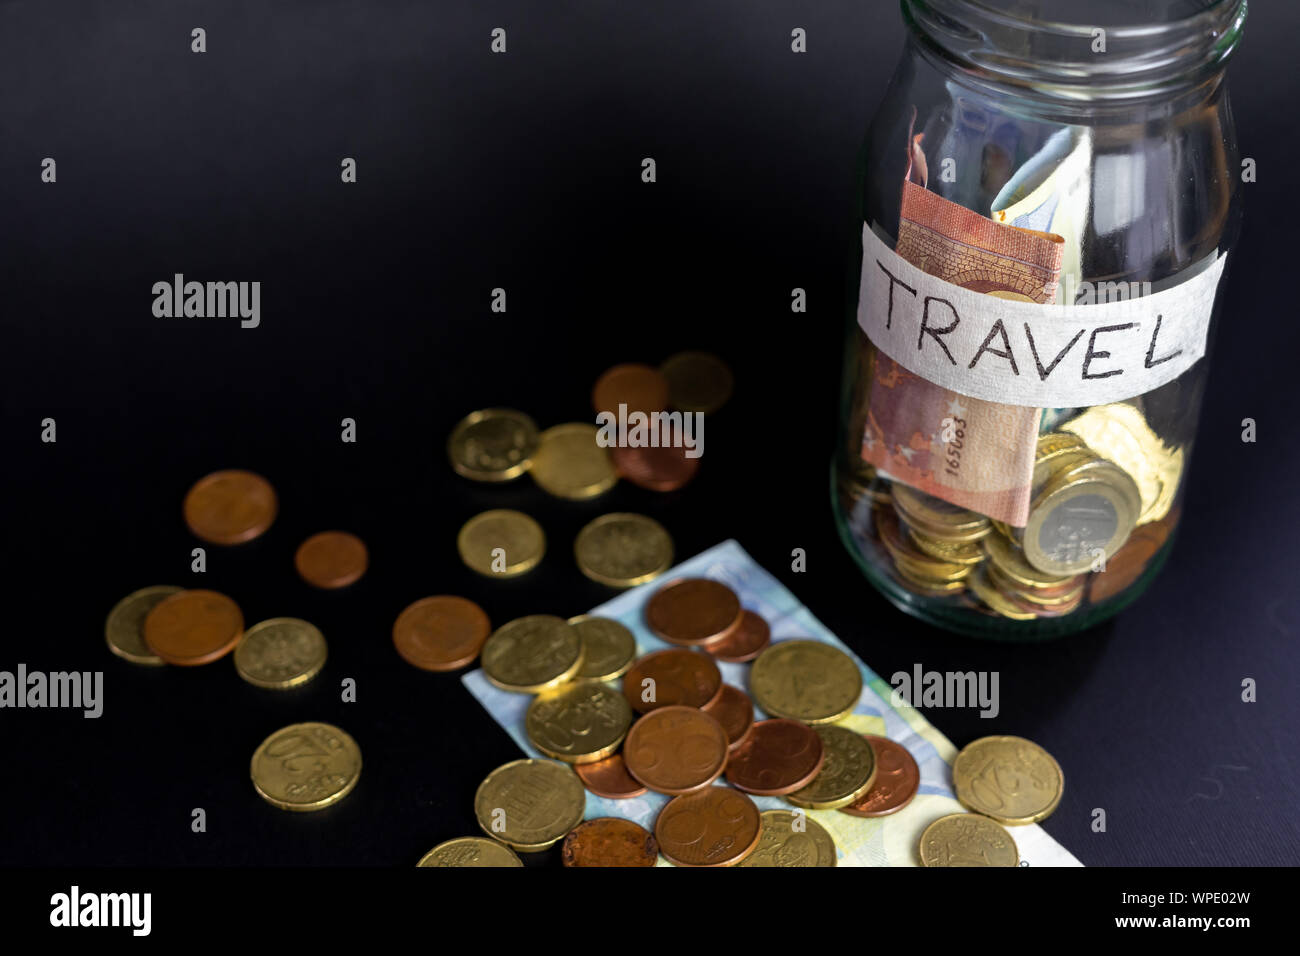 Glass transparent jar labeled handwritten travel. Euro Banknotes and coins inside and outside of the jar. Isolated black background. Stock Photo